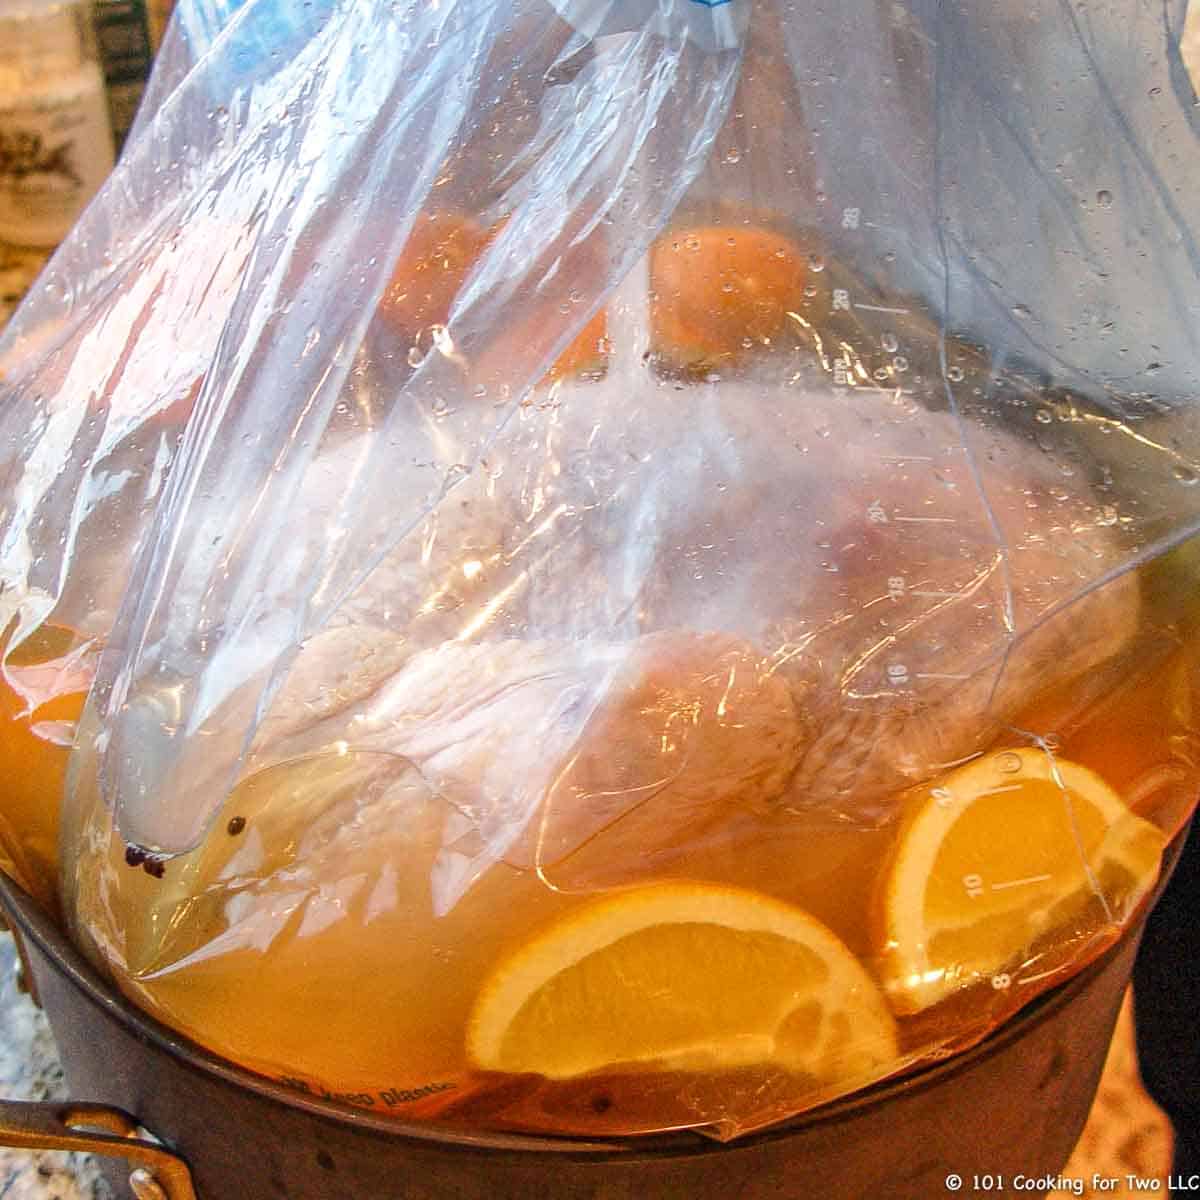 https://www.101cookingfortwo.com/wp-content/uploads/2012/11/brining-a-turkey-in-a-bag.jpg